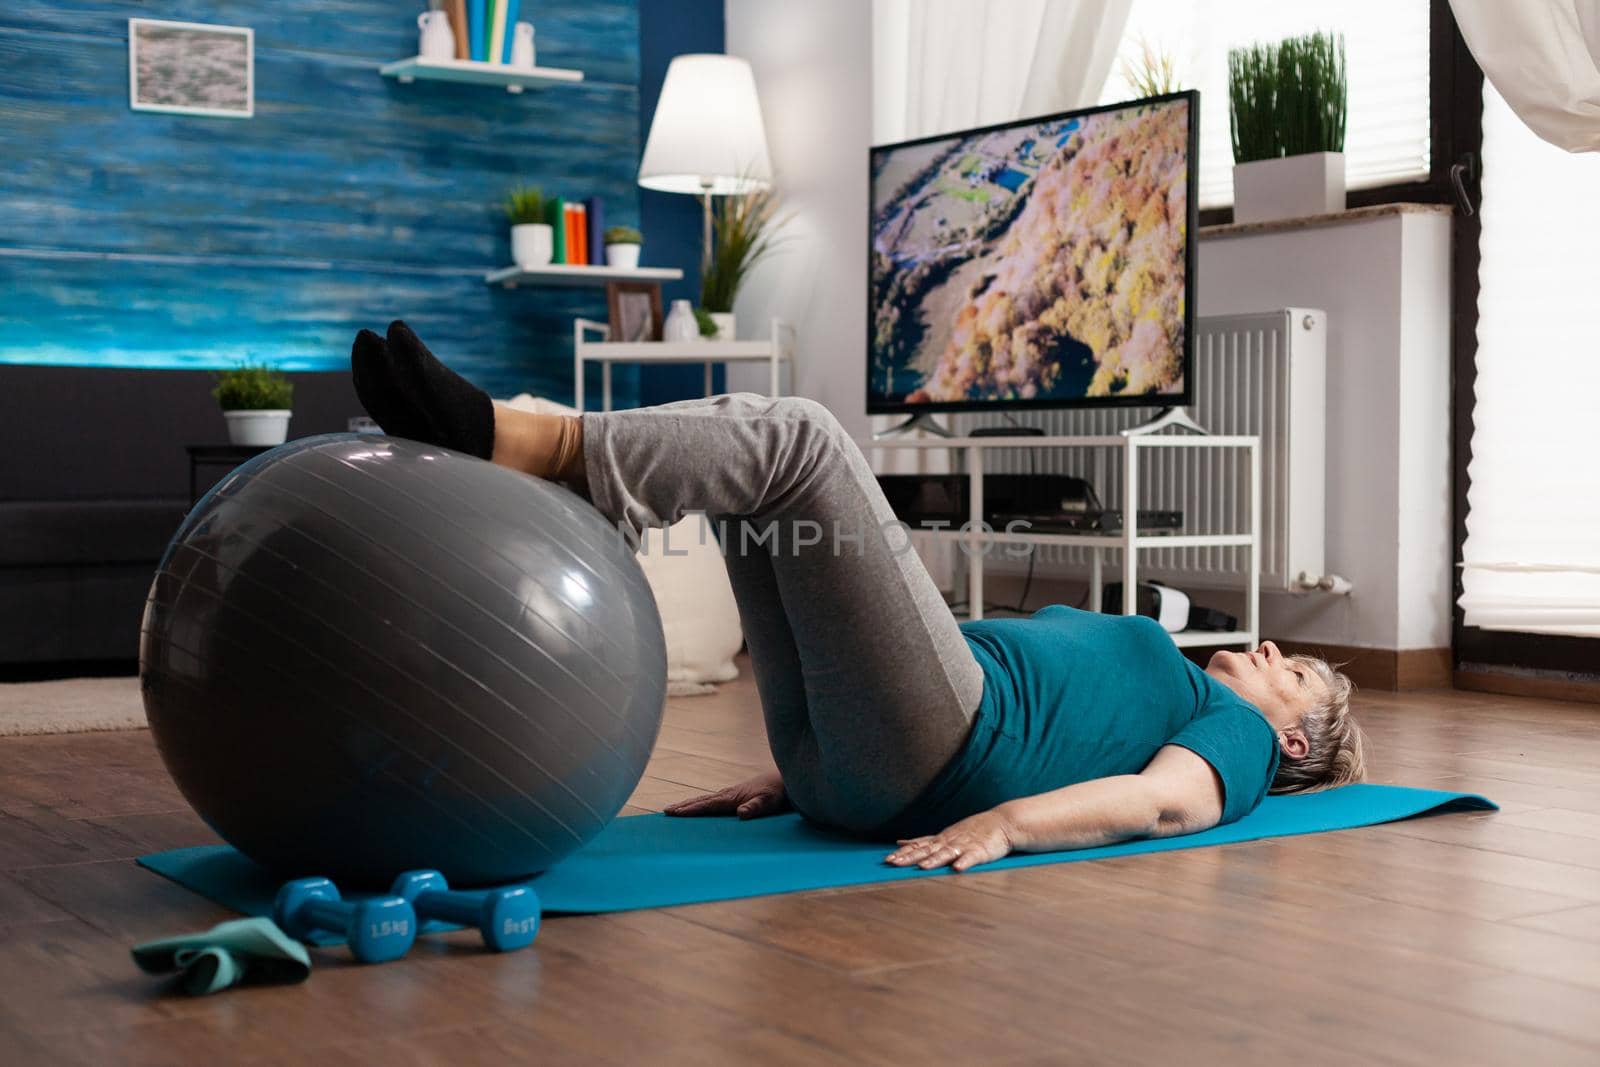 Retired senior woman doing practicing legs up exercise using swiss ball sitting on yoga mat by DCStudio